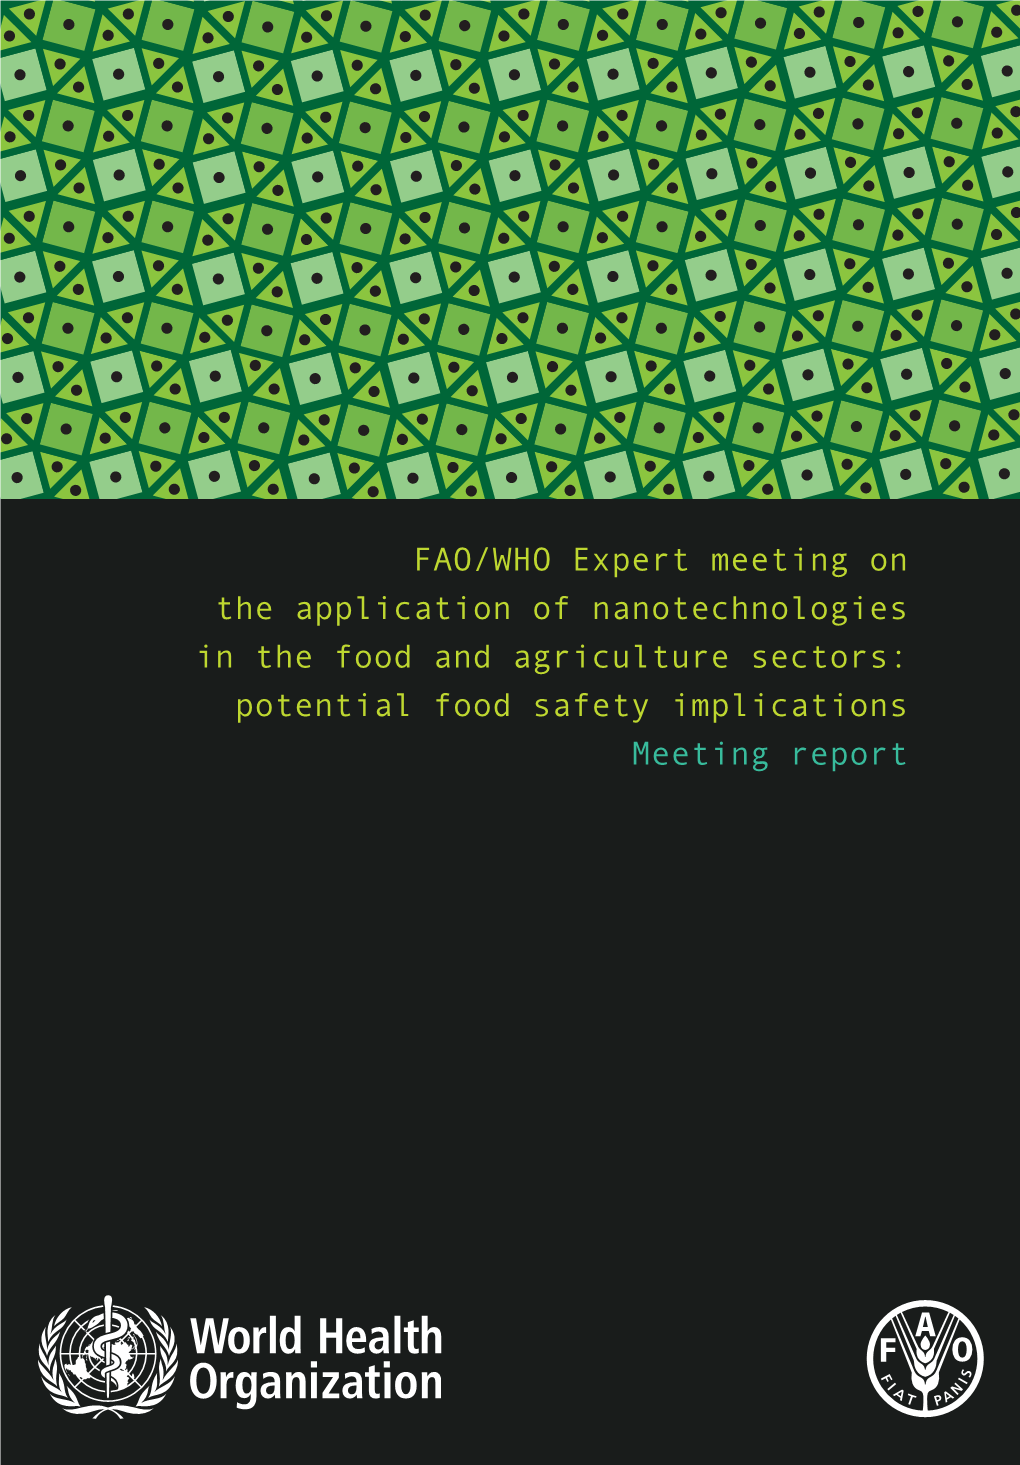 FAO/WHO Expert Meeting on the Application of Nanotechnologies in the Food and Agriculture Sectors: Potential Food Safety Implica